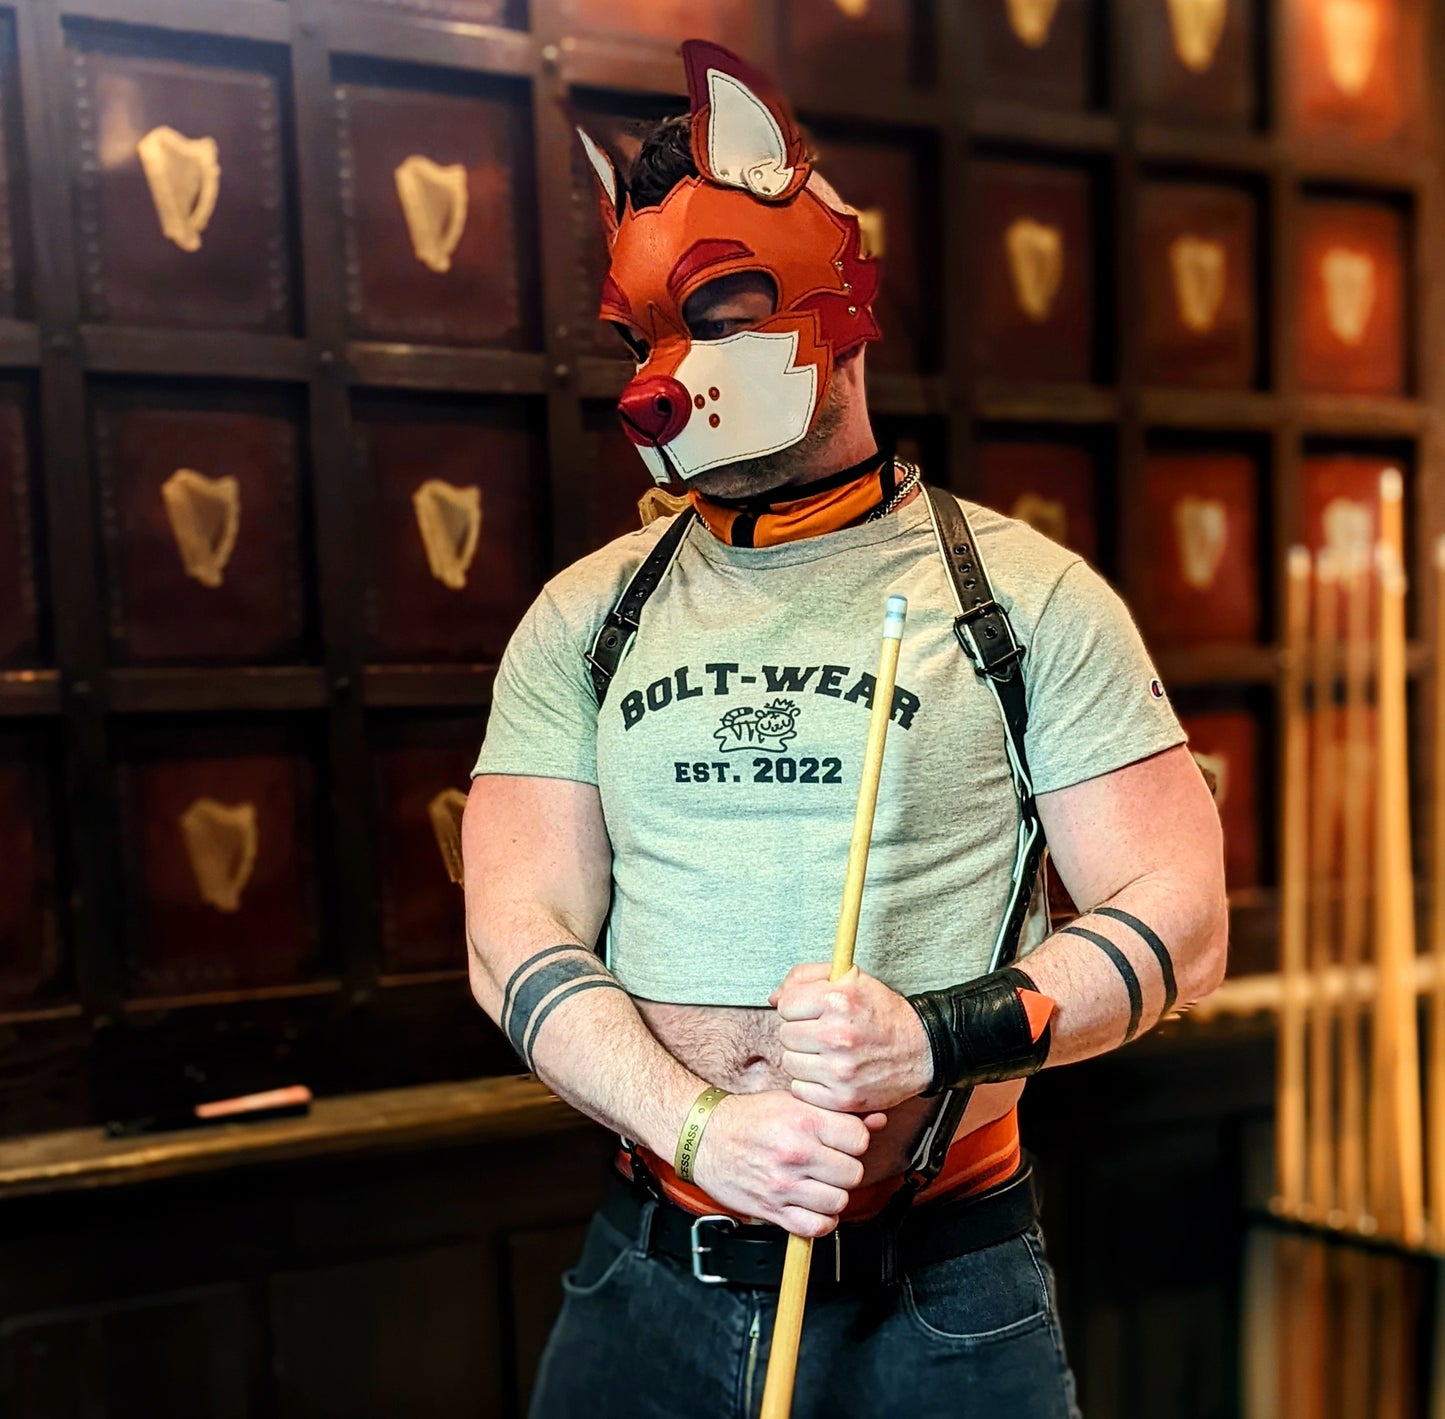 Man in orang and red pup hood wearing grey athletic heather crop top featuring bolt-wear tiger logo and est. 2022. Also wearing leather harness and standing with pool stick in front of cabinetry.